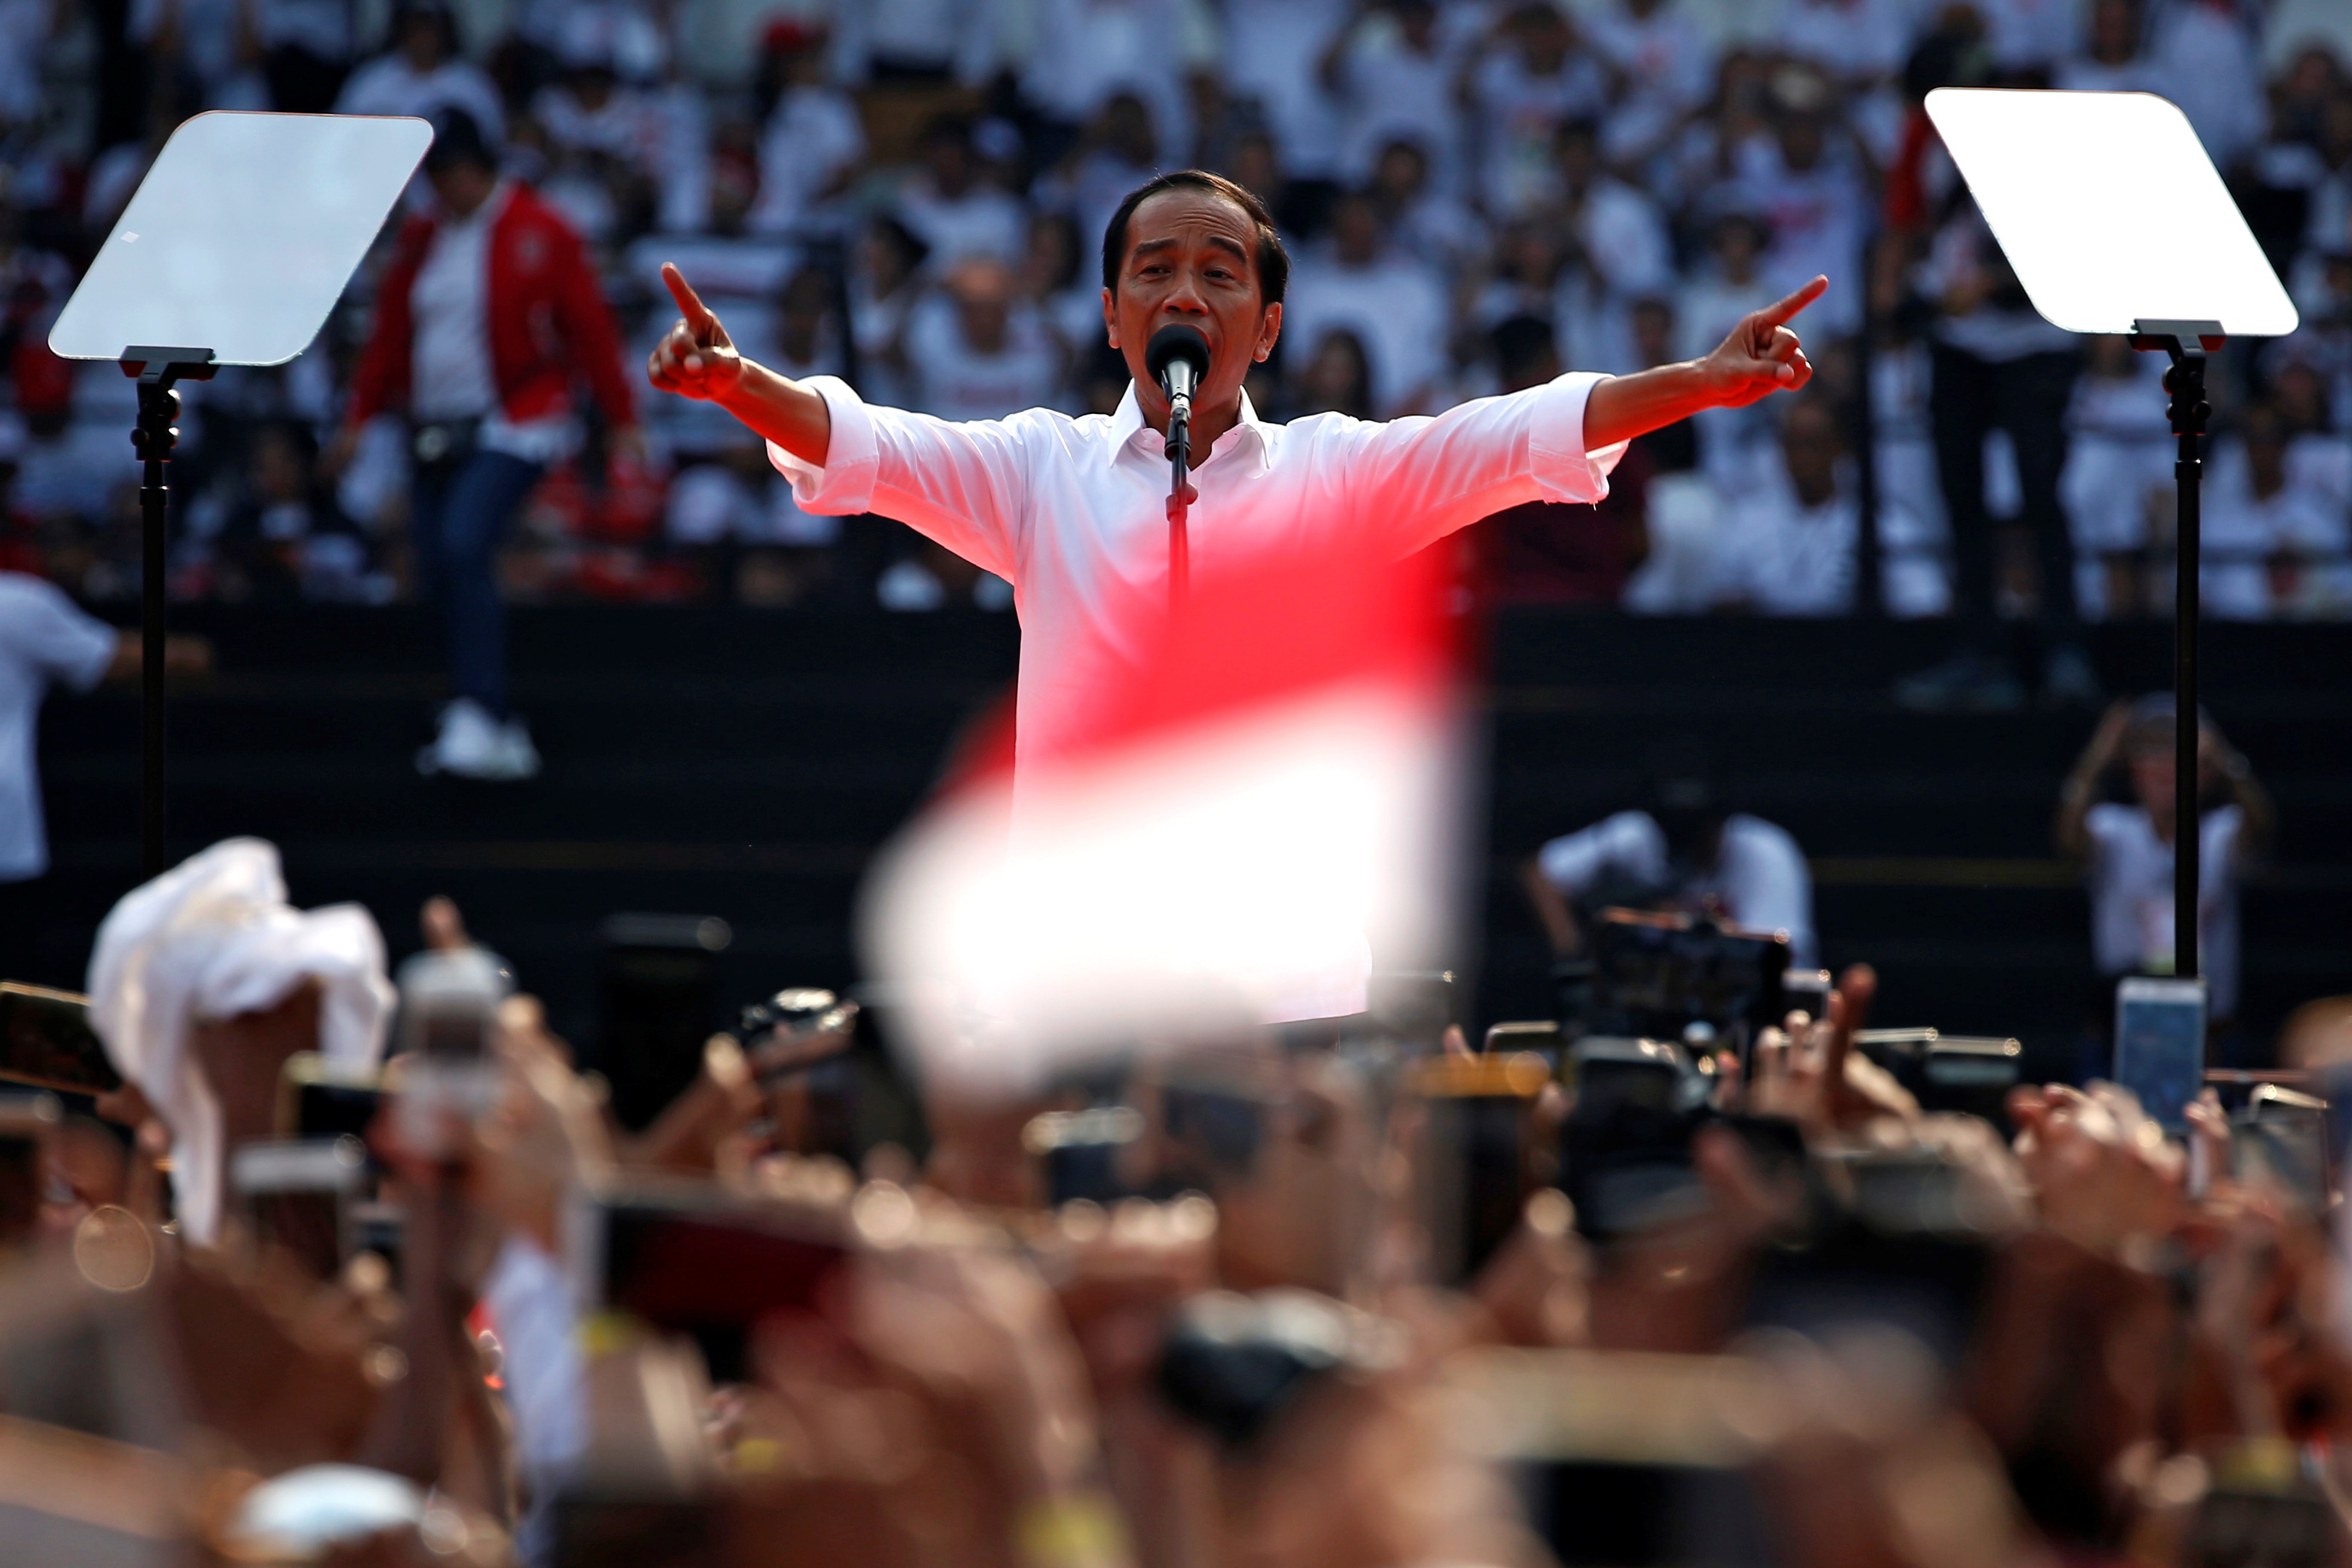 Indonesia's incumbent presidential candidate Joko Widodo has taken an early lead. Photo: Reuters